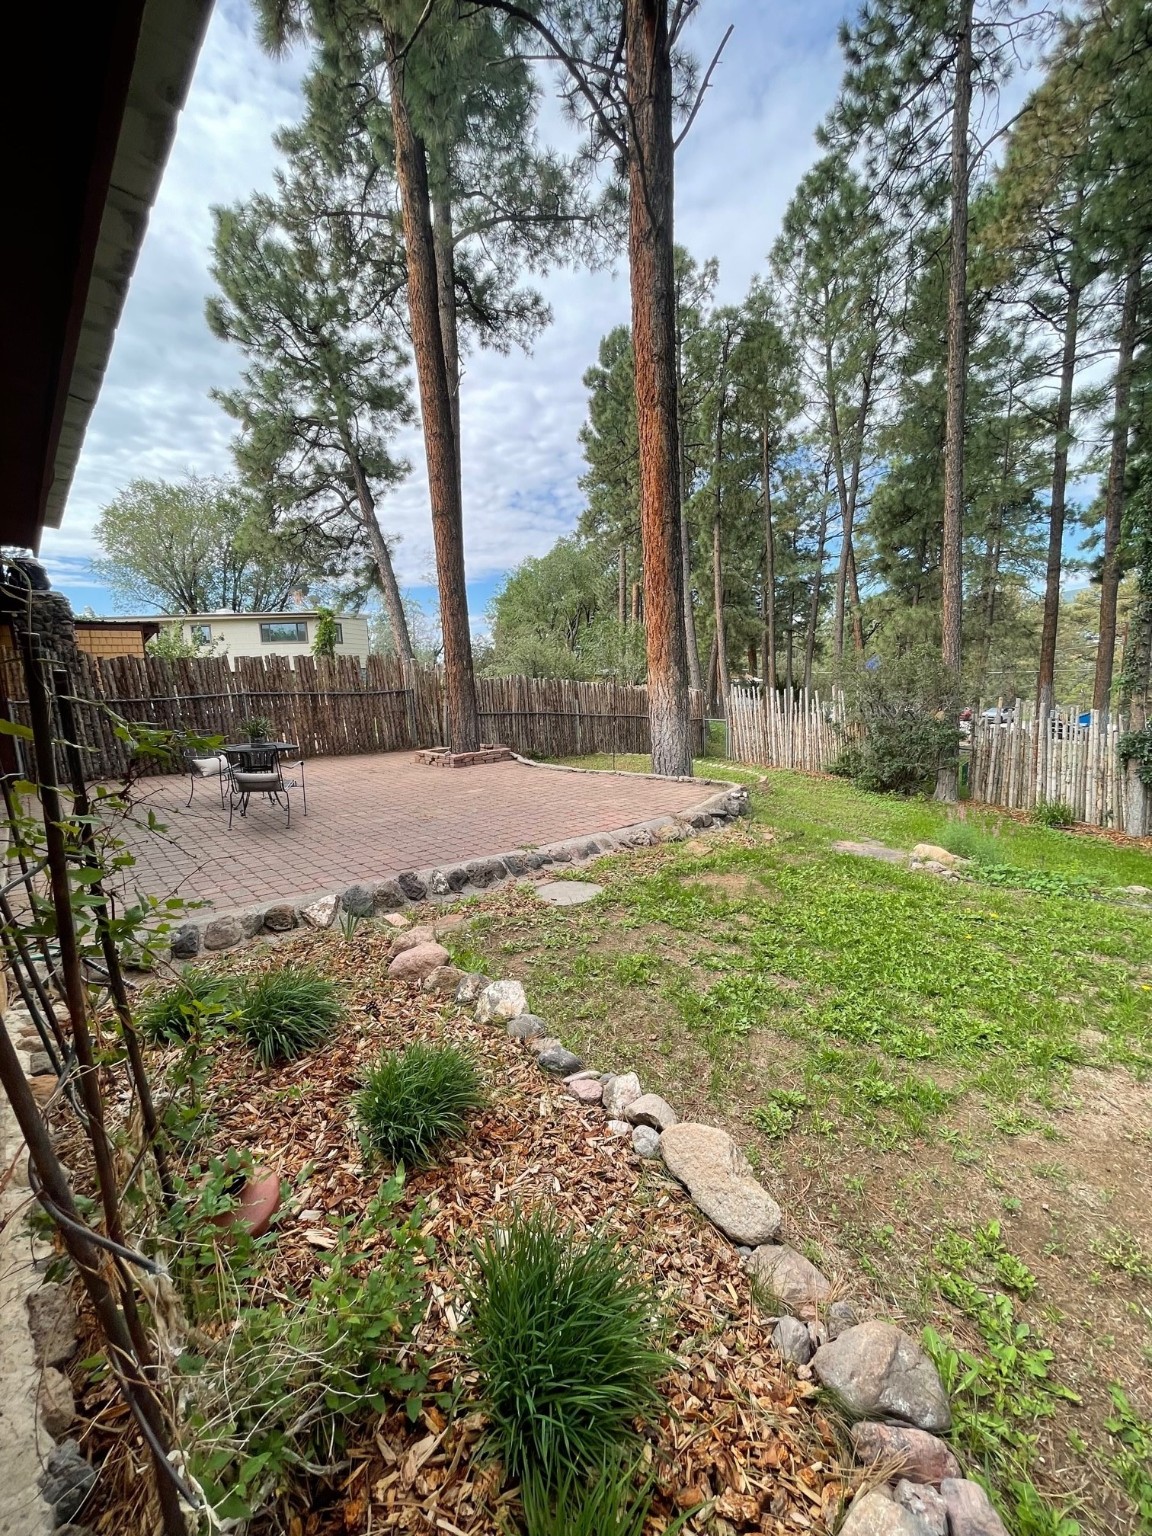 2249 38th B, Los Alamos, New Mexico 87544, 3 Bedrooms Bedrooms, ,2 BathroomsBathrooms,Residential,For Sale,2249 38th B,202232577